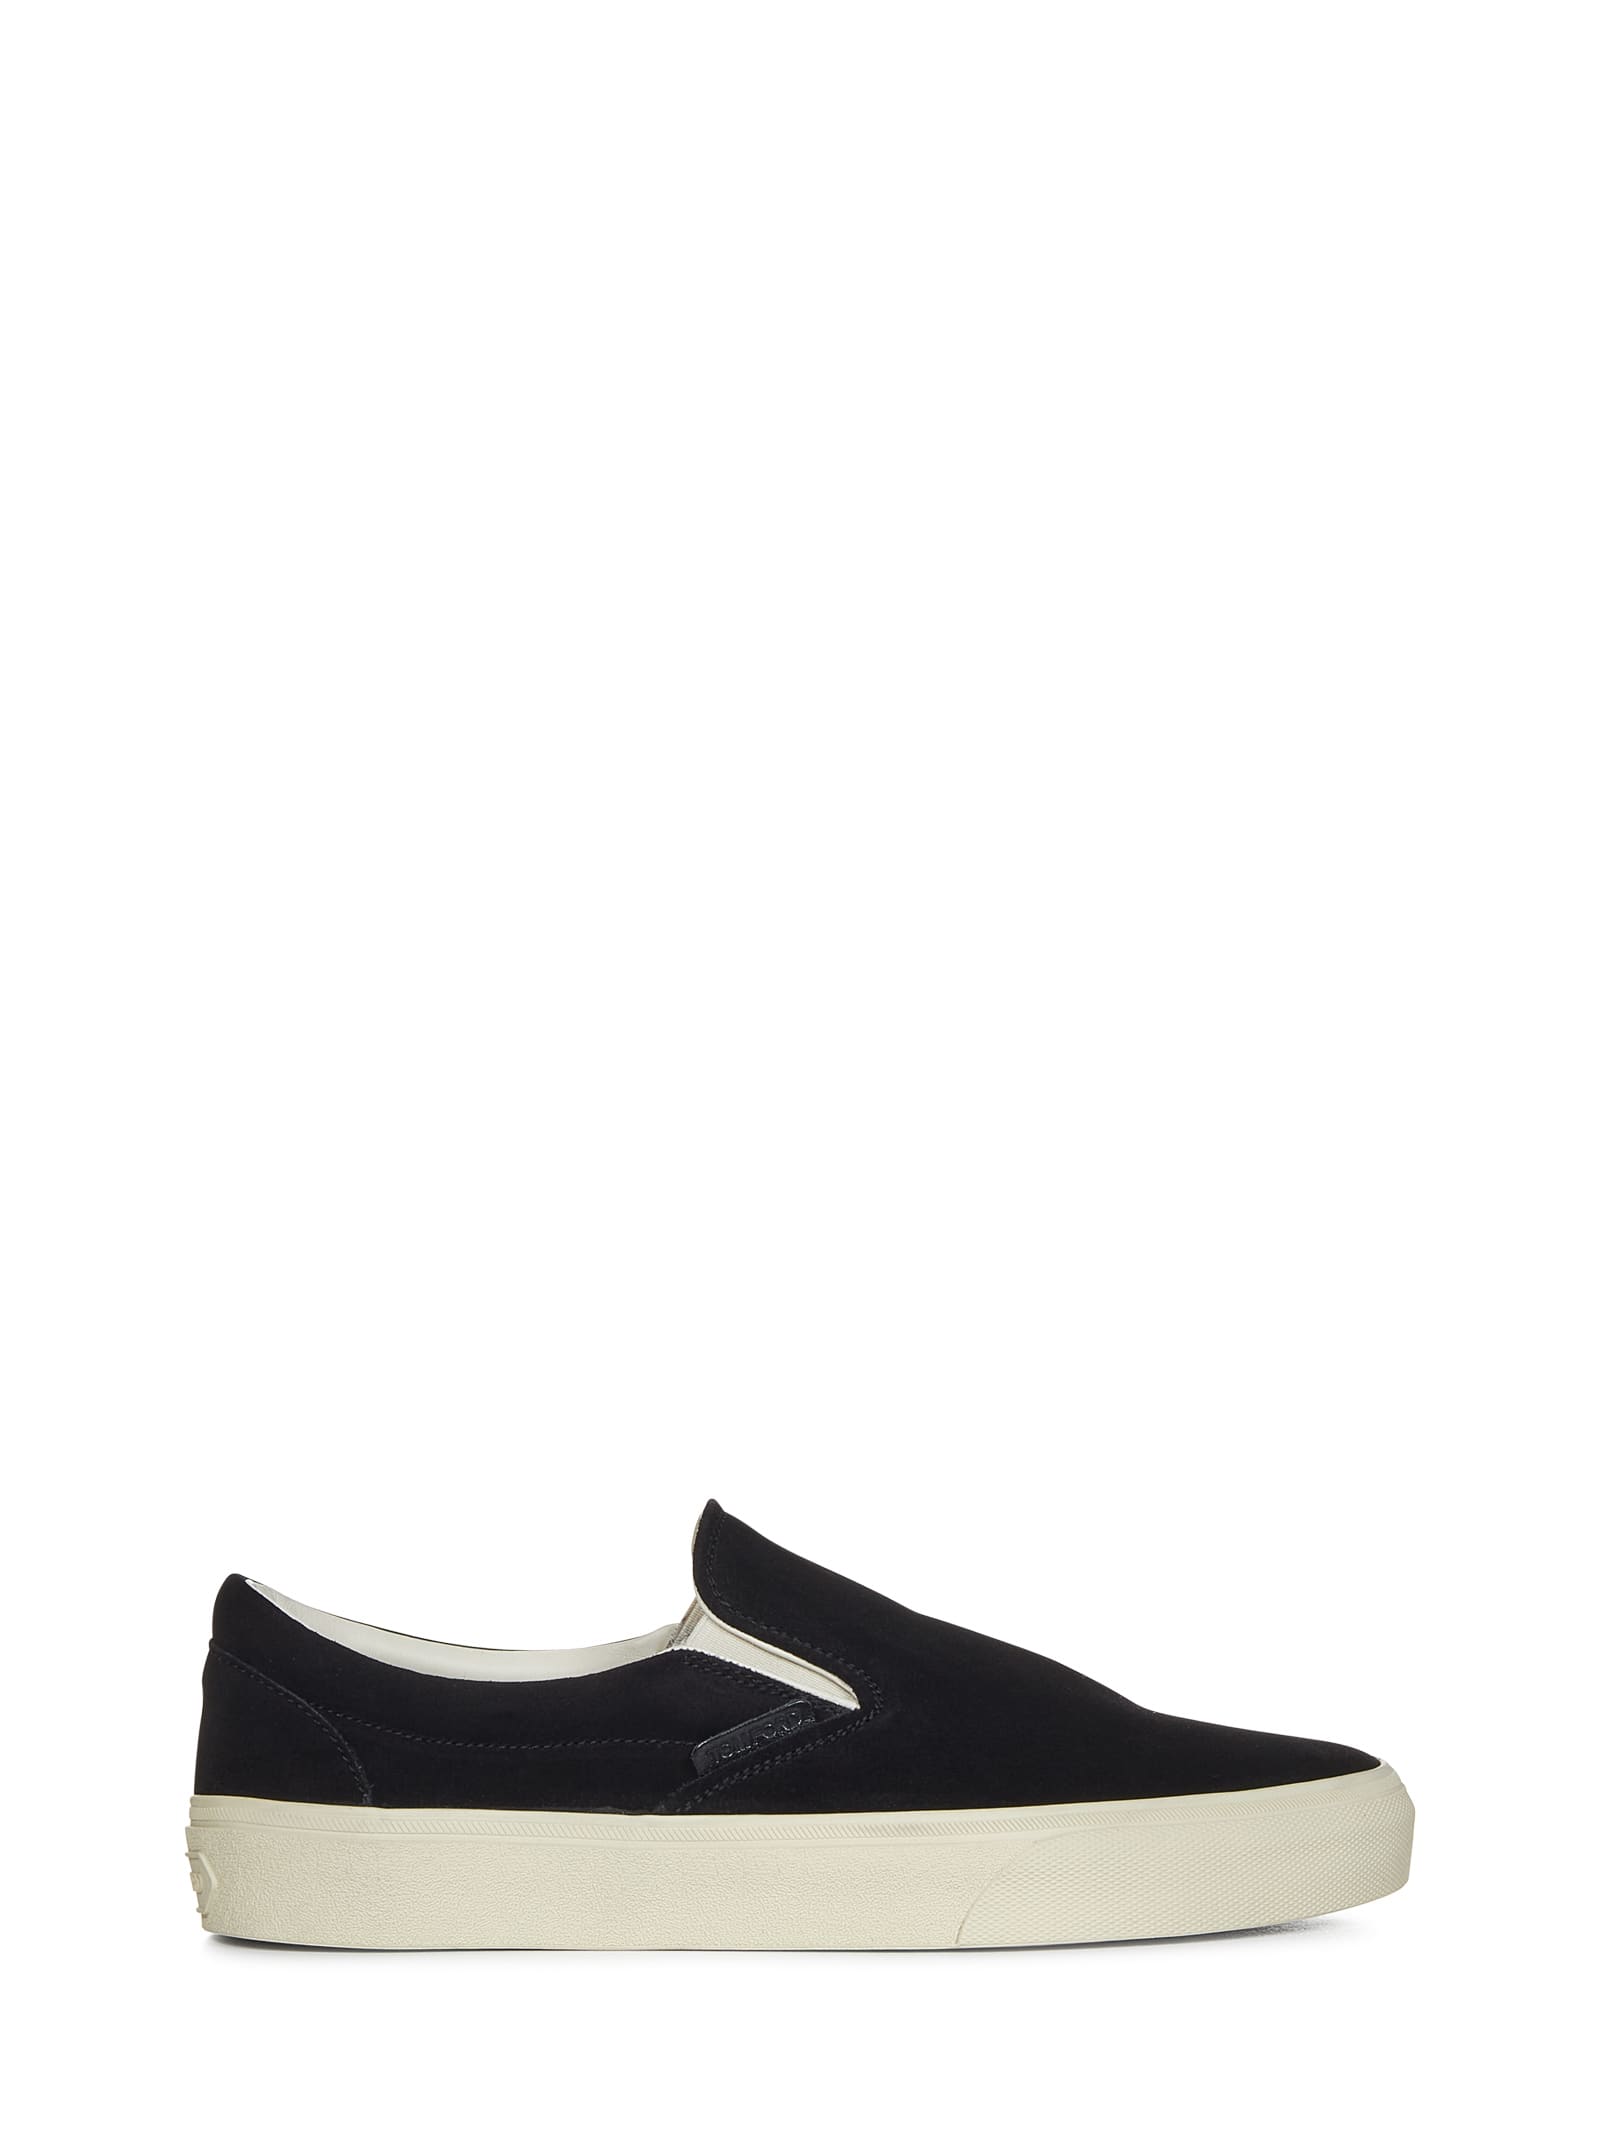 Shop Tom Ford Sneakers In Black/neutrals